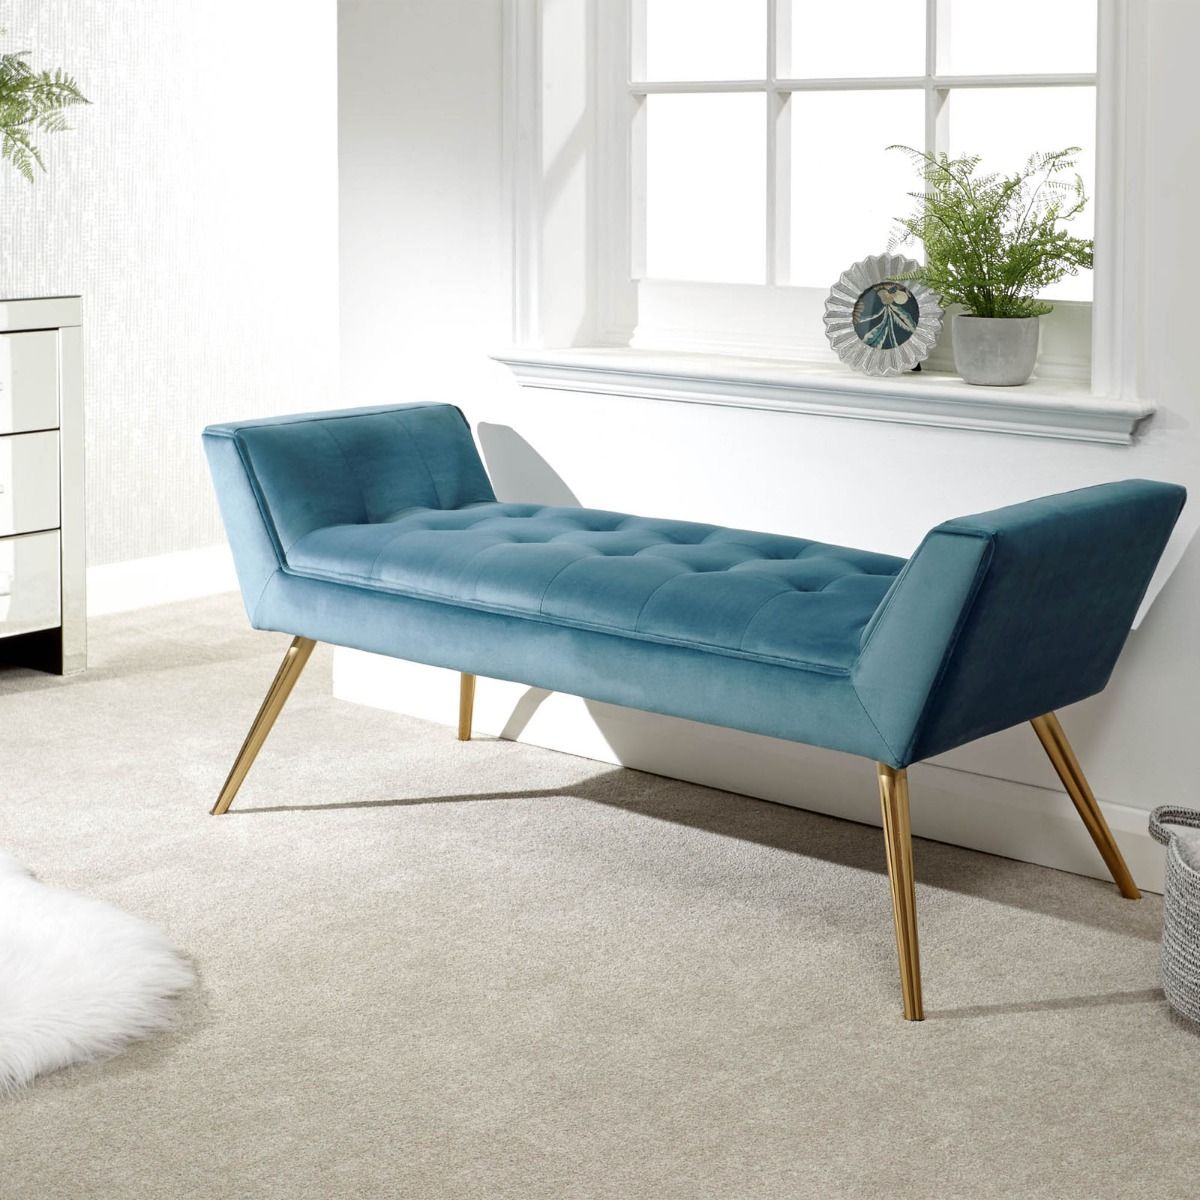 Turin Upholstered Window Seat - Teal